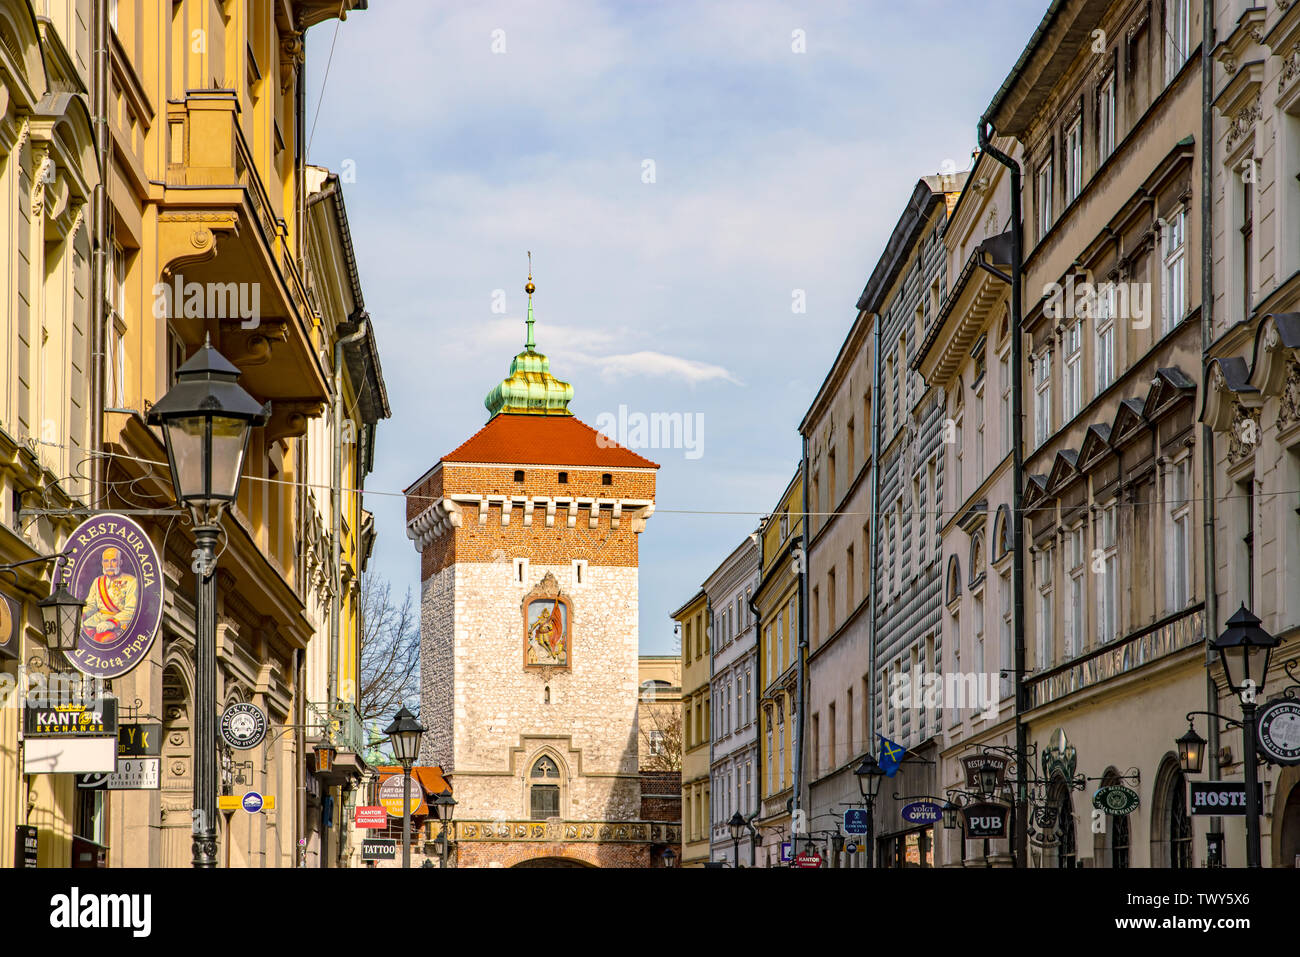 Cracow, Poland – Feb 02, 2019: View at Medieval tower with entrance Gate to Florianska street in the Old Town section of Cracow, Poland UNESCO world H Stock Photo